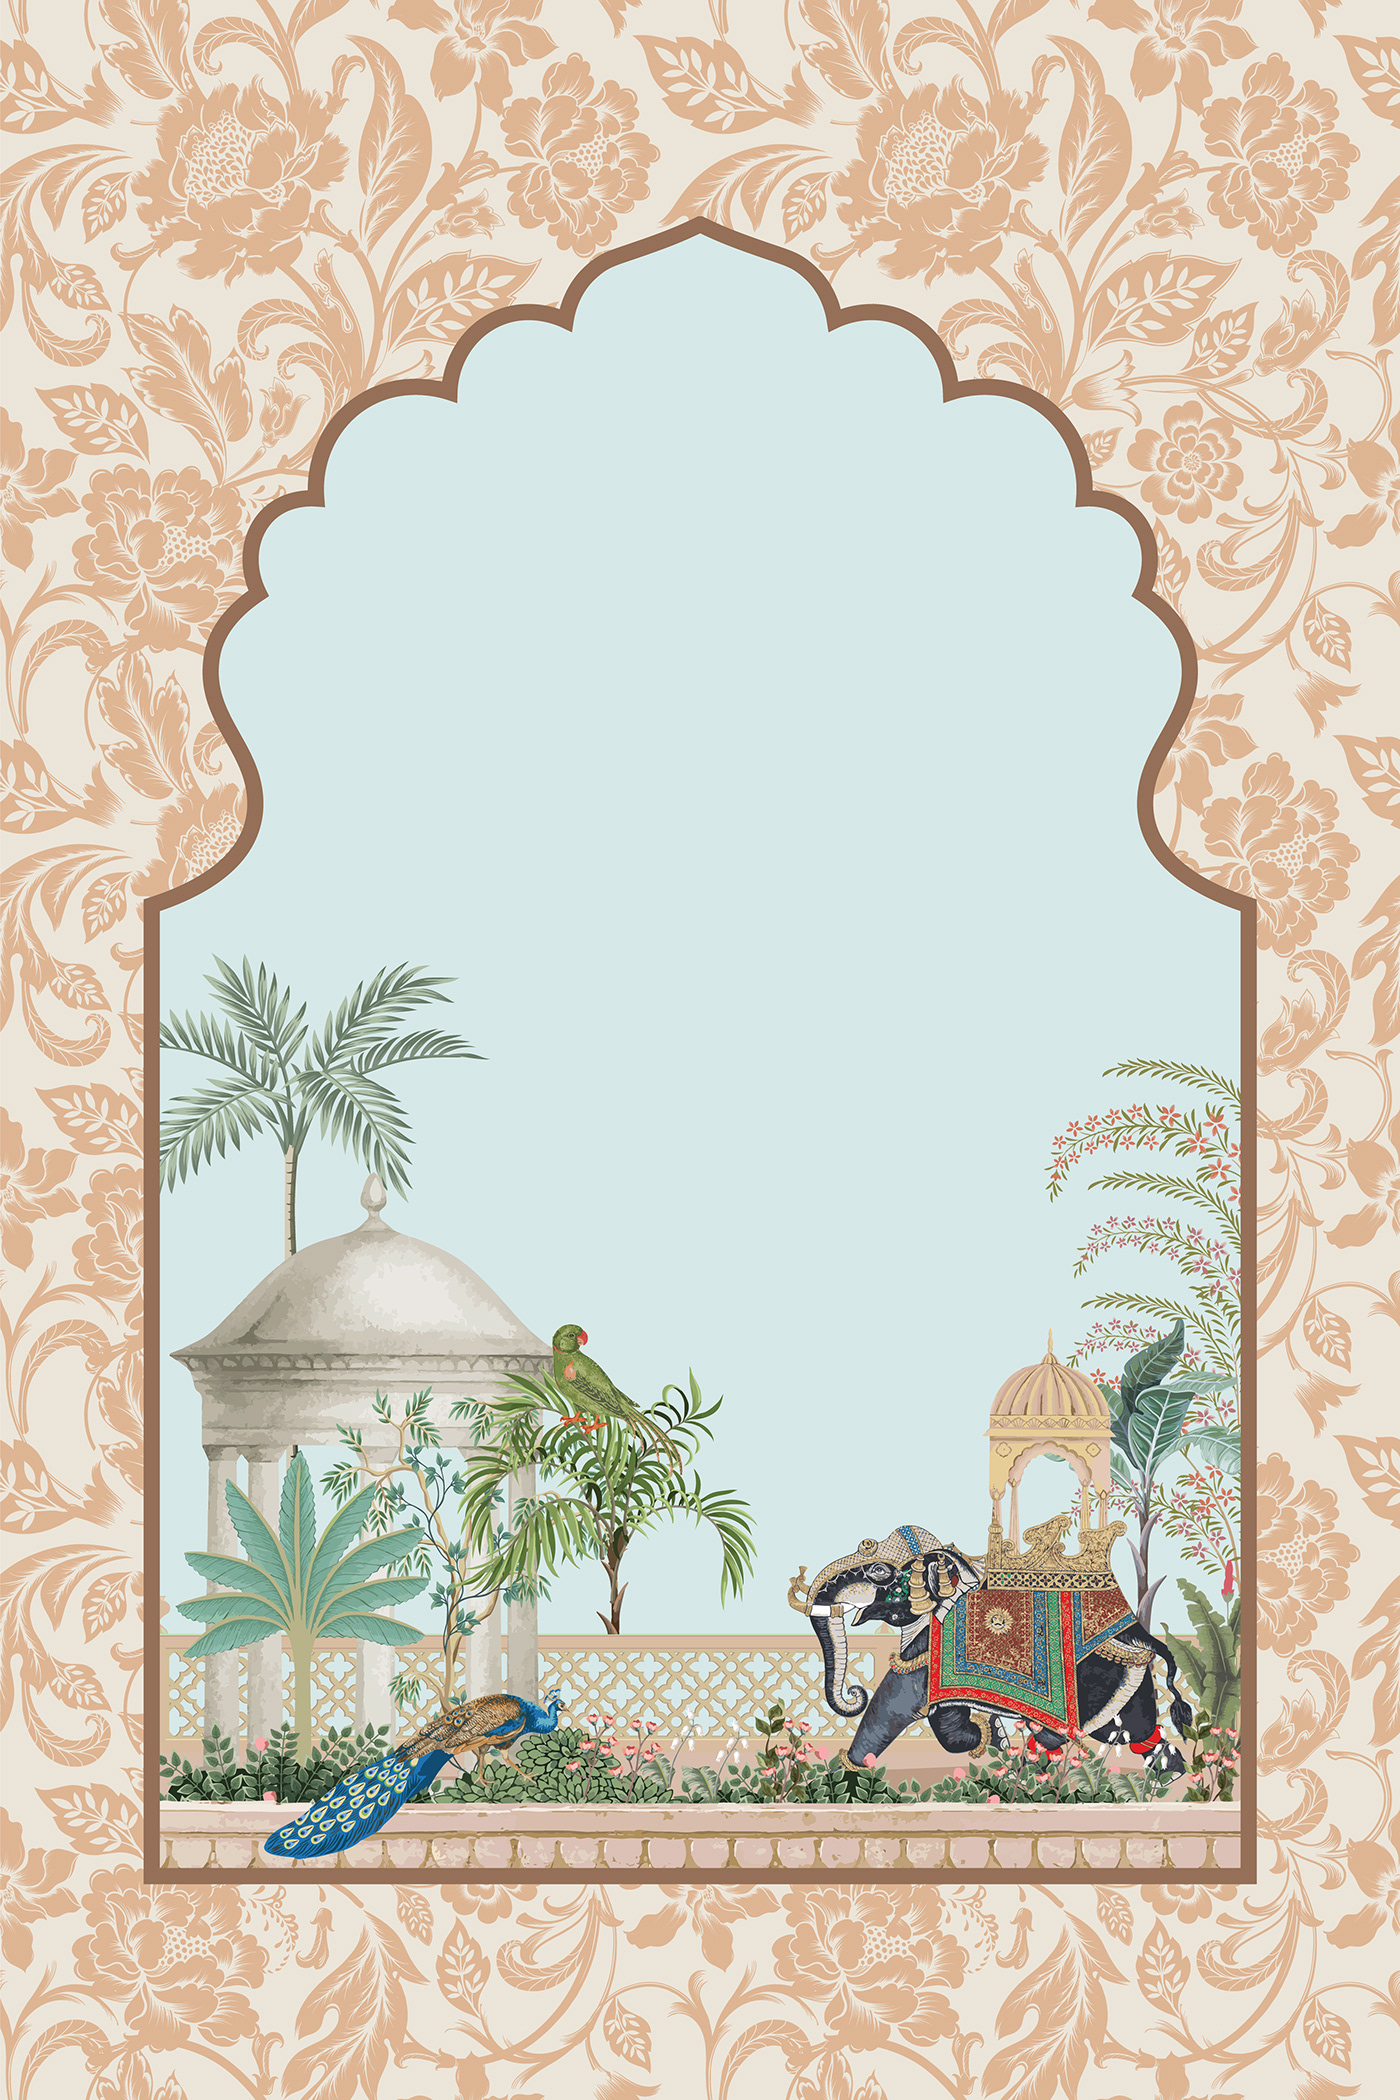 ILLUSTRATION  indian wedding Miniature wallpaper Mural middle east persian Morocco Landscape Tree 